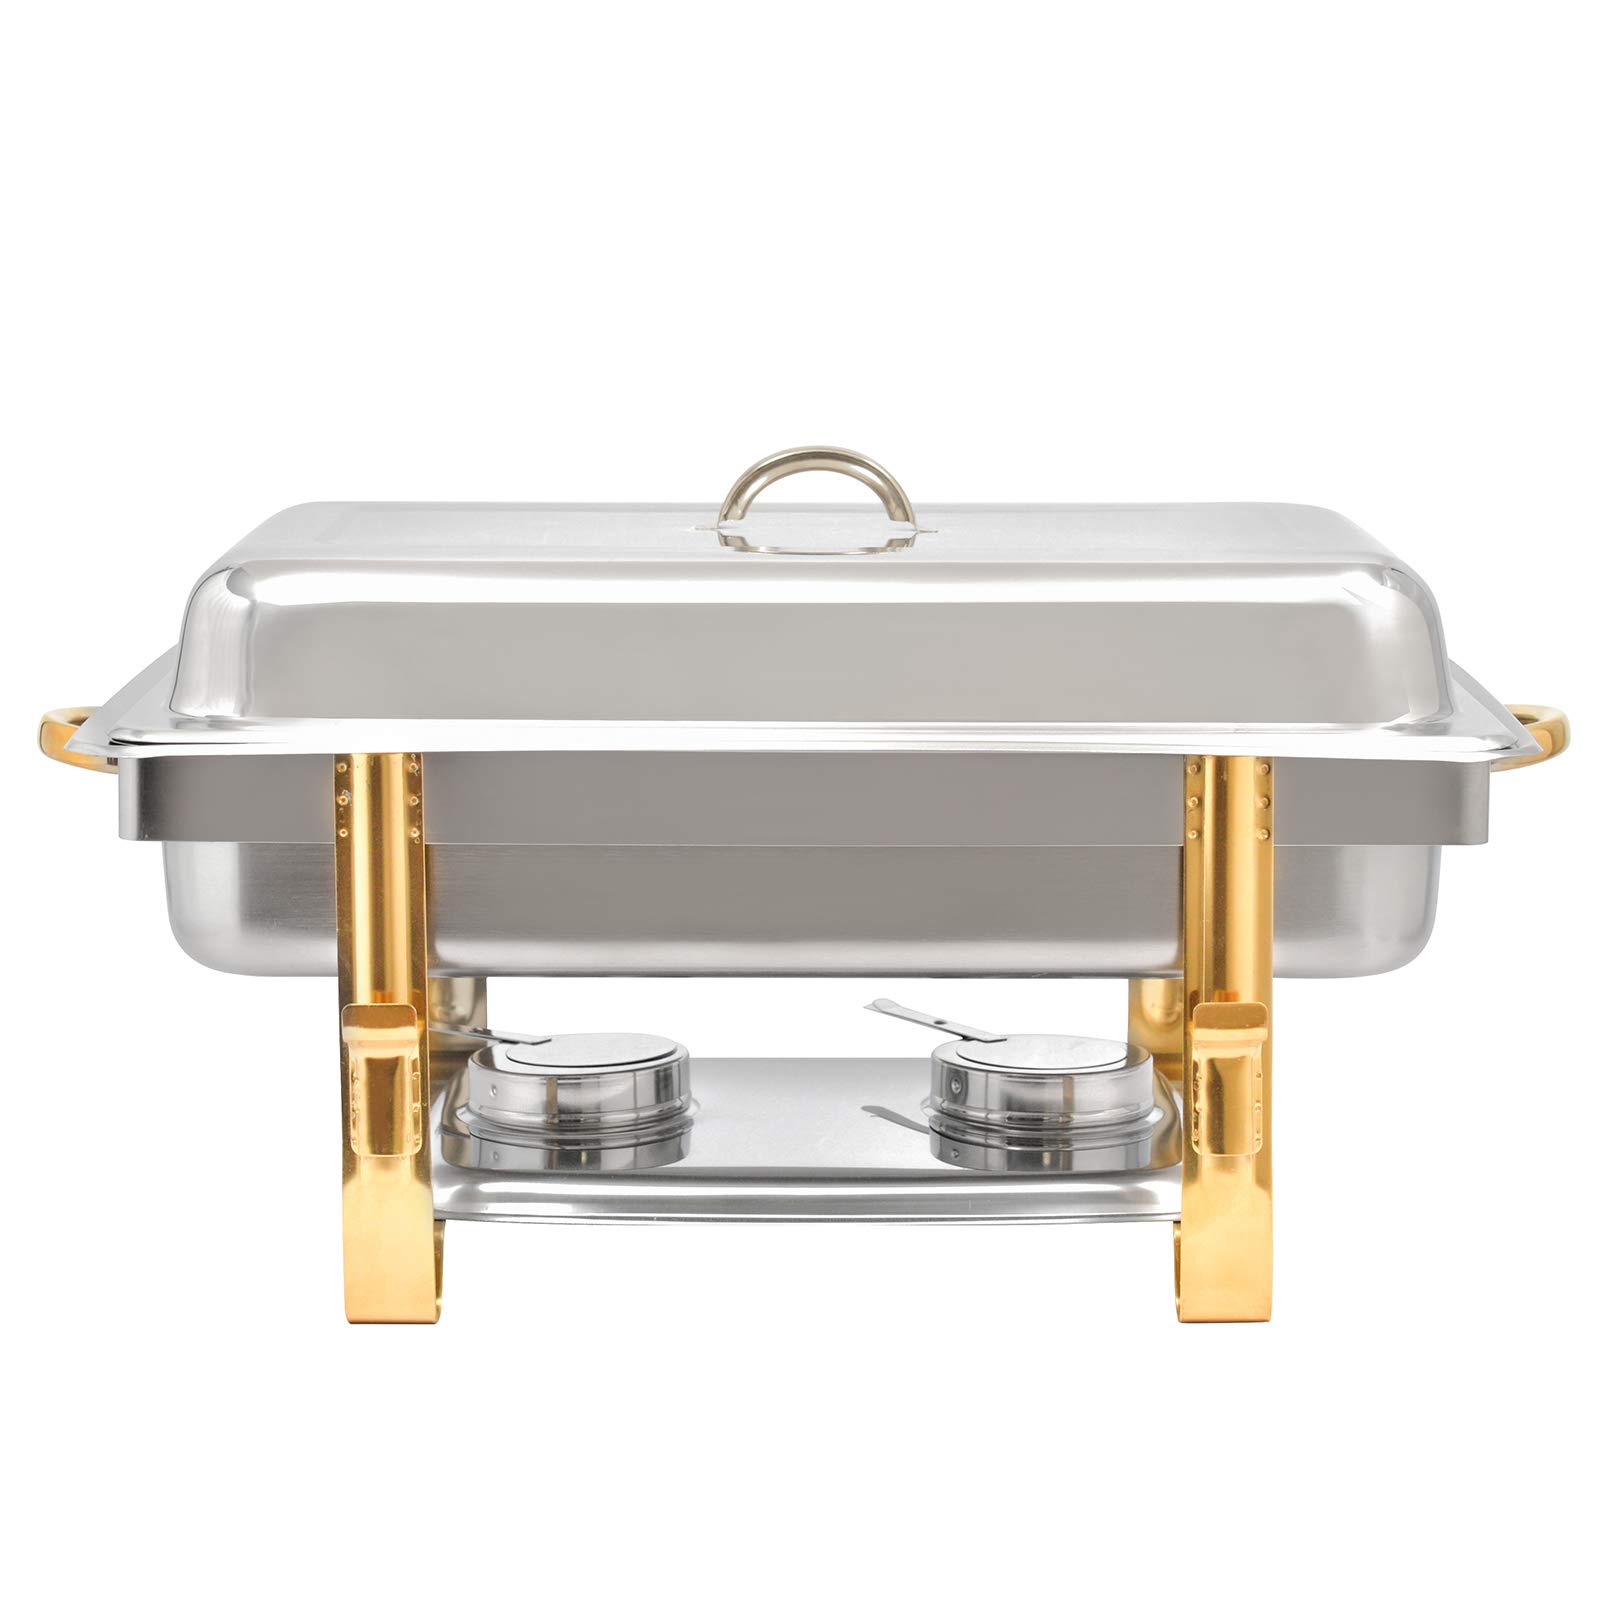 9.5QT Chafing Dish Stainless Steel Chafer Complete Set, Rectangular Chafing Dish Buffet Set Catering Warmer Set with Food and Water Trays Lid Folding Frame Stand, Golden Handle